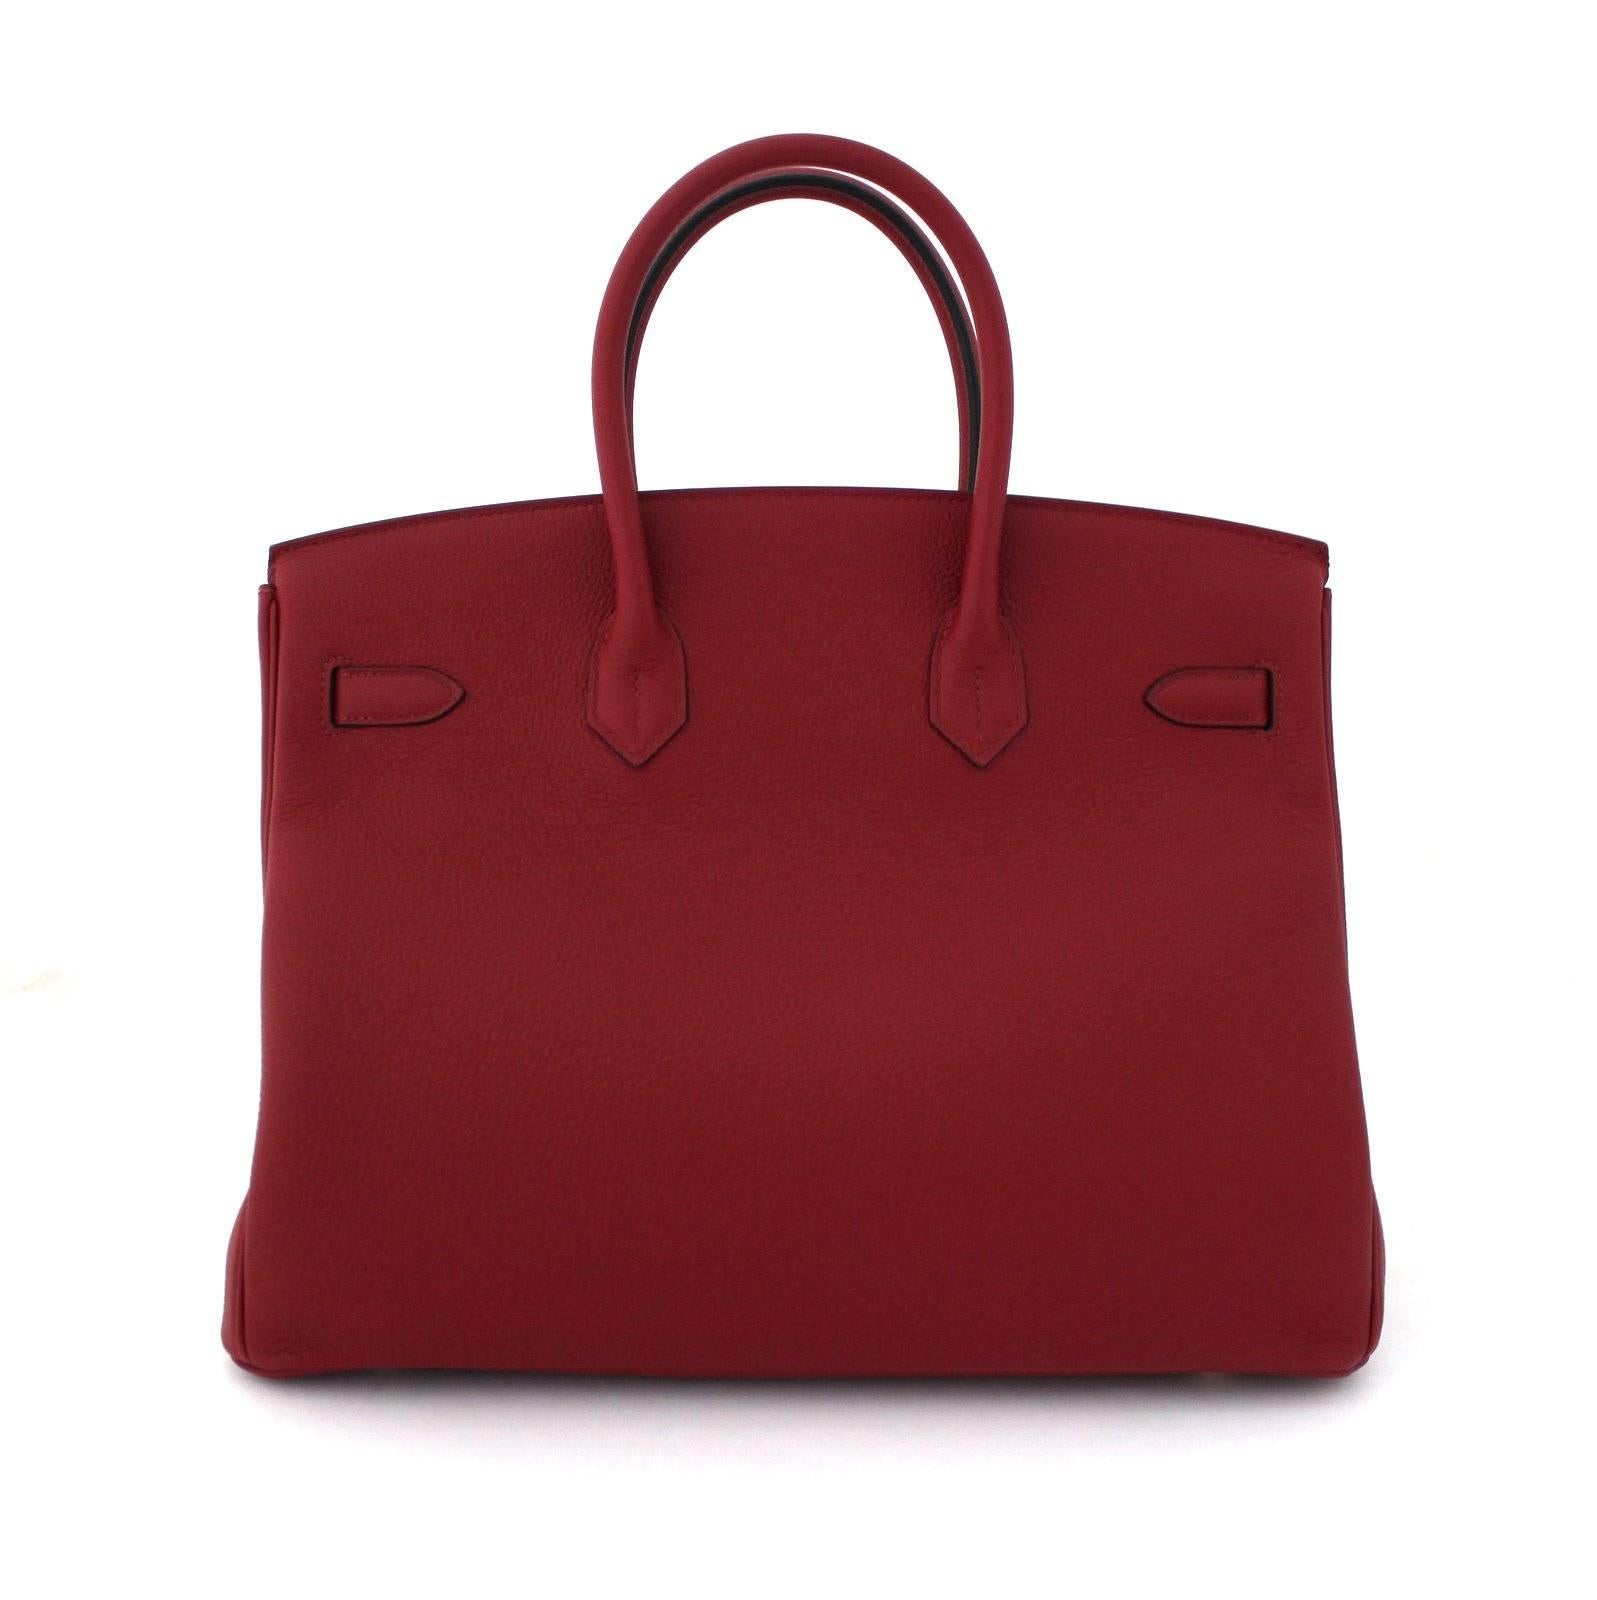 Pristine, store fresh condition (plastic on hardware) Hermès Birkin Bag in ROUGE GRENAT Togo Leather, GHW 35 cm, x stamp
Purchase includes padlock, keys, clochette, protective felt, raincoat, dust bags and Hermès box with tissue. 
Crafted by